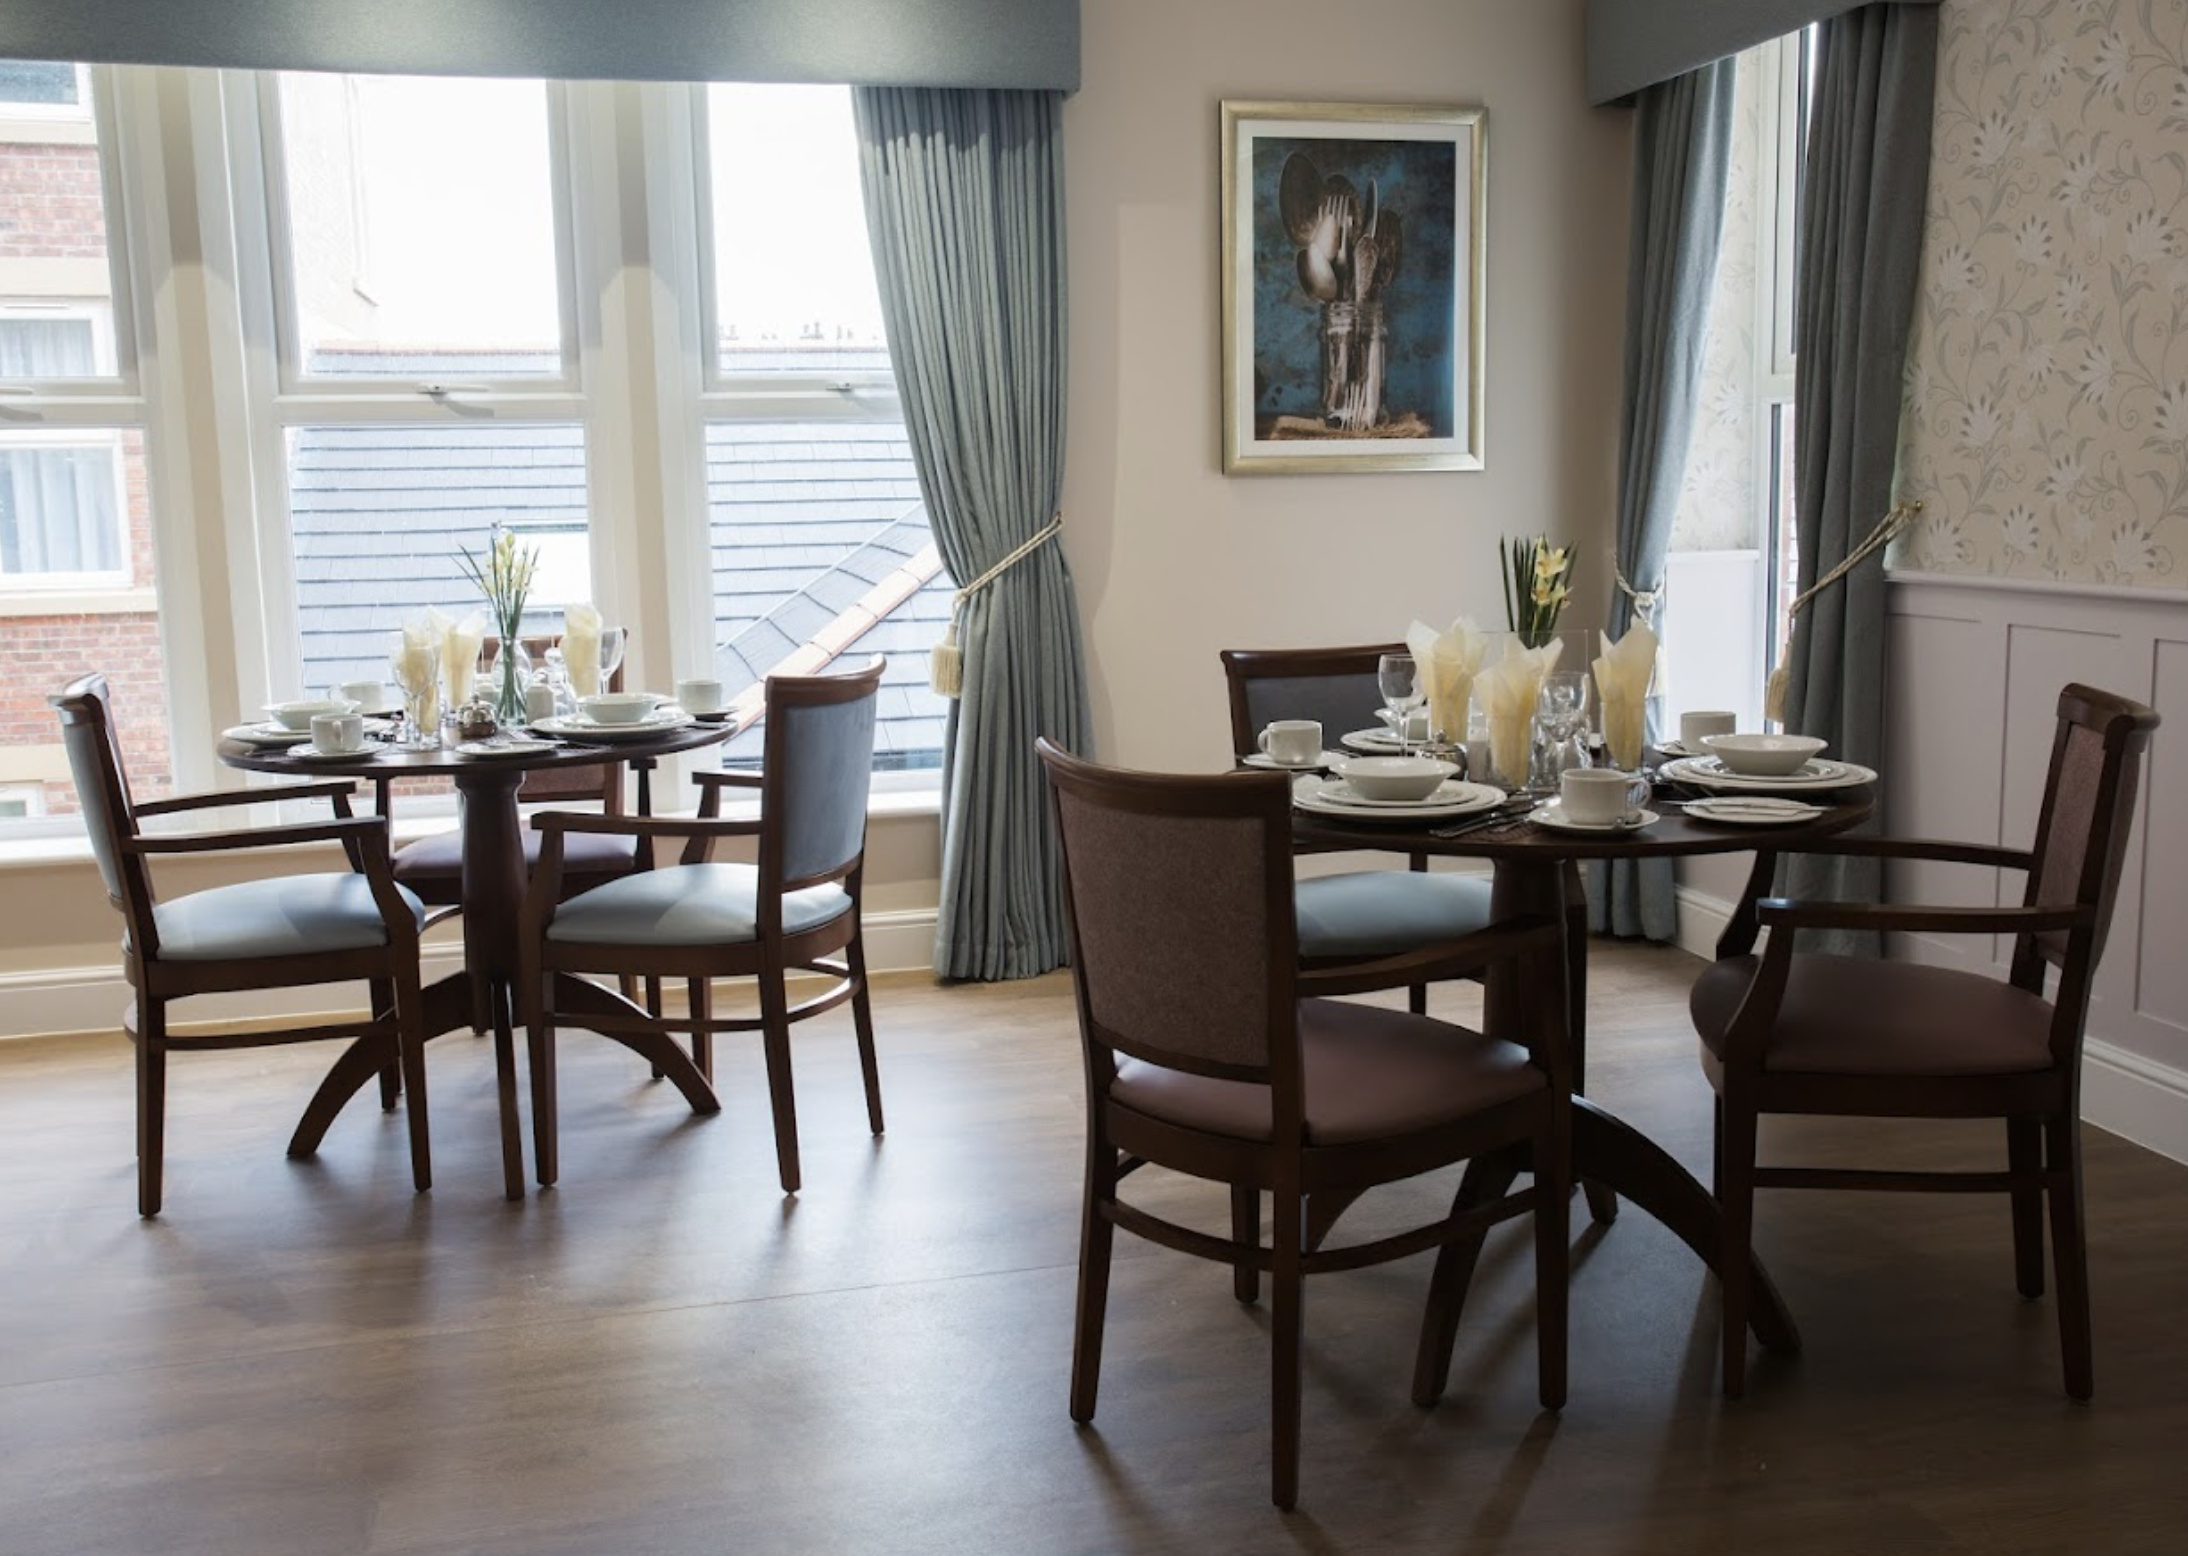 Dining room of Wykebeck Court care home in Leeds, Yorkshire